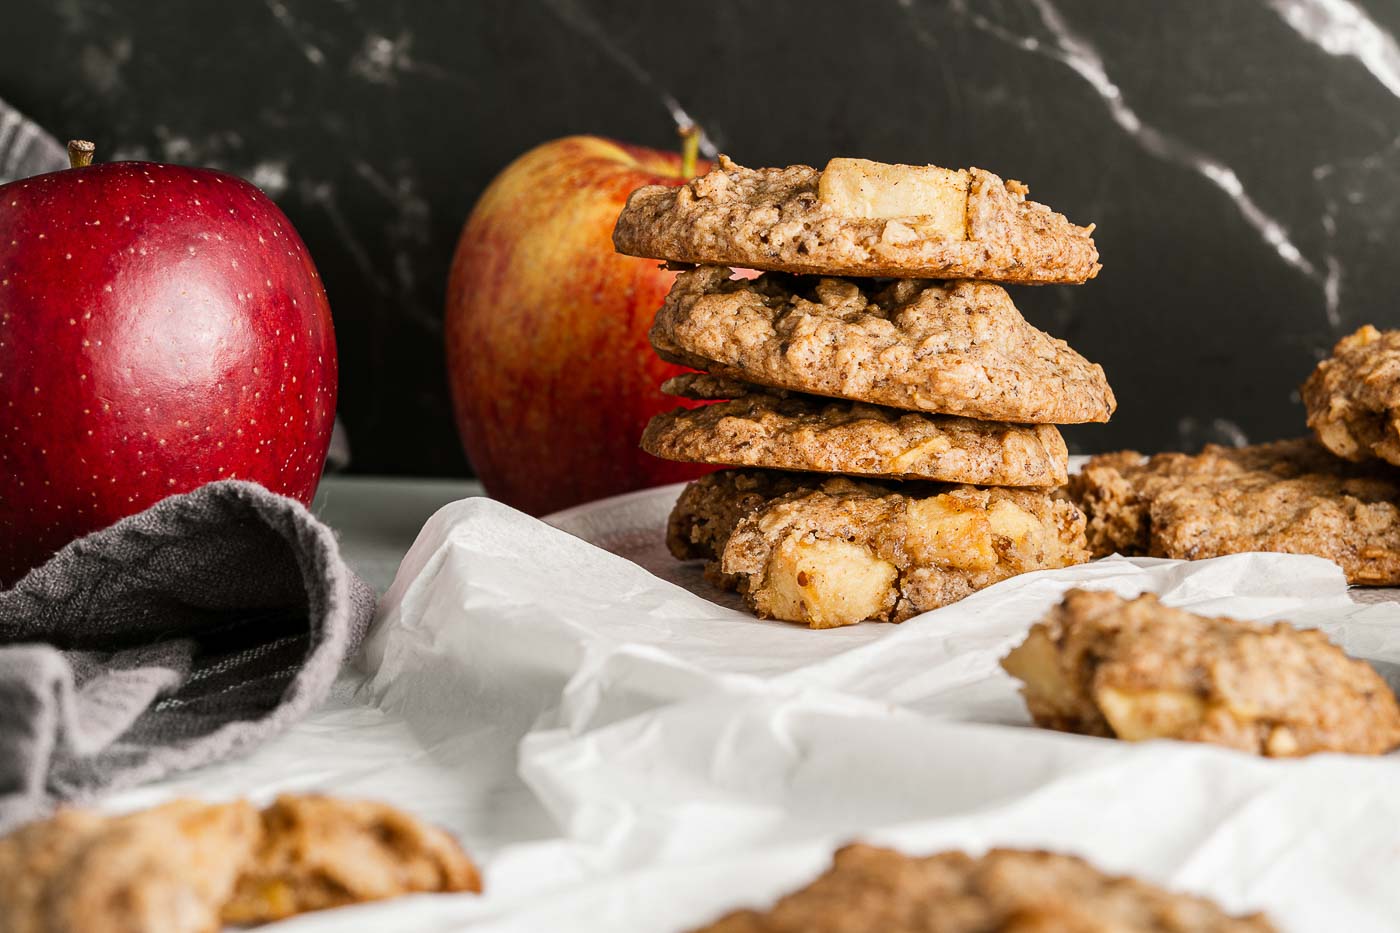 stacked oatmeal cookies and apples in background